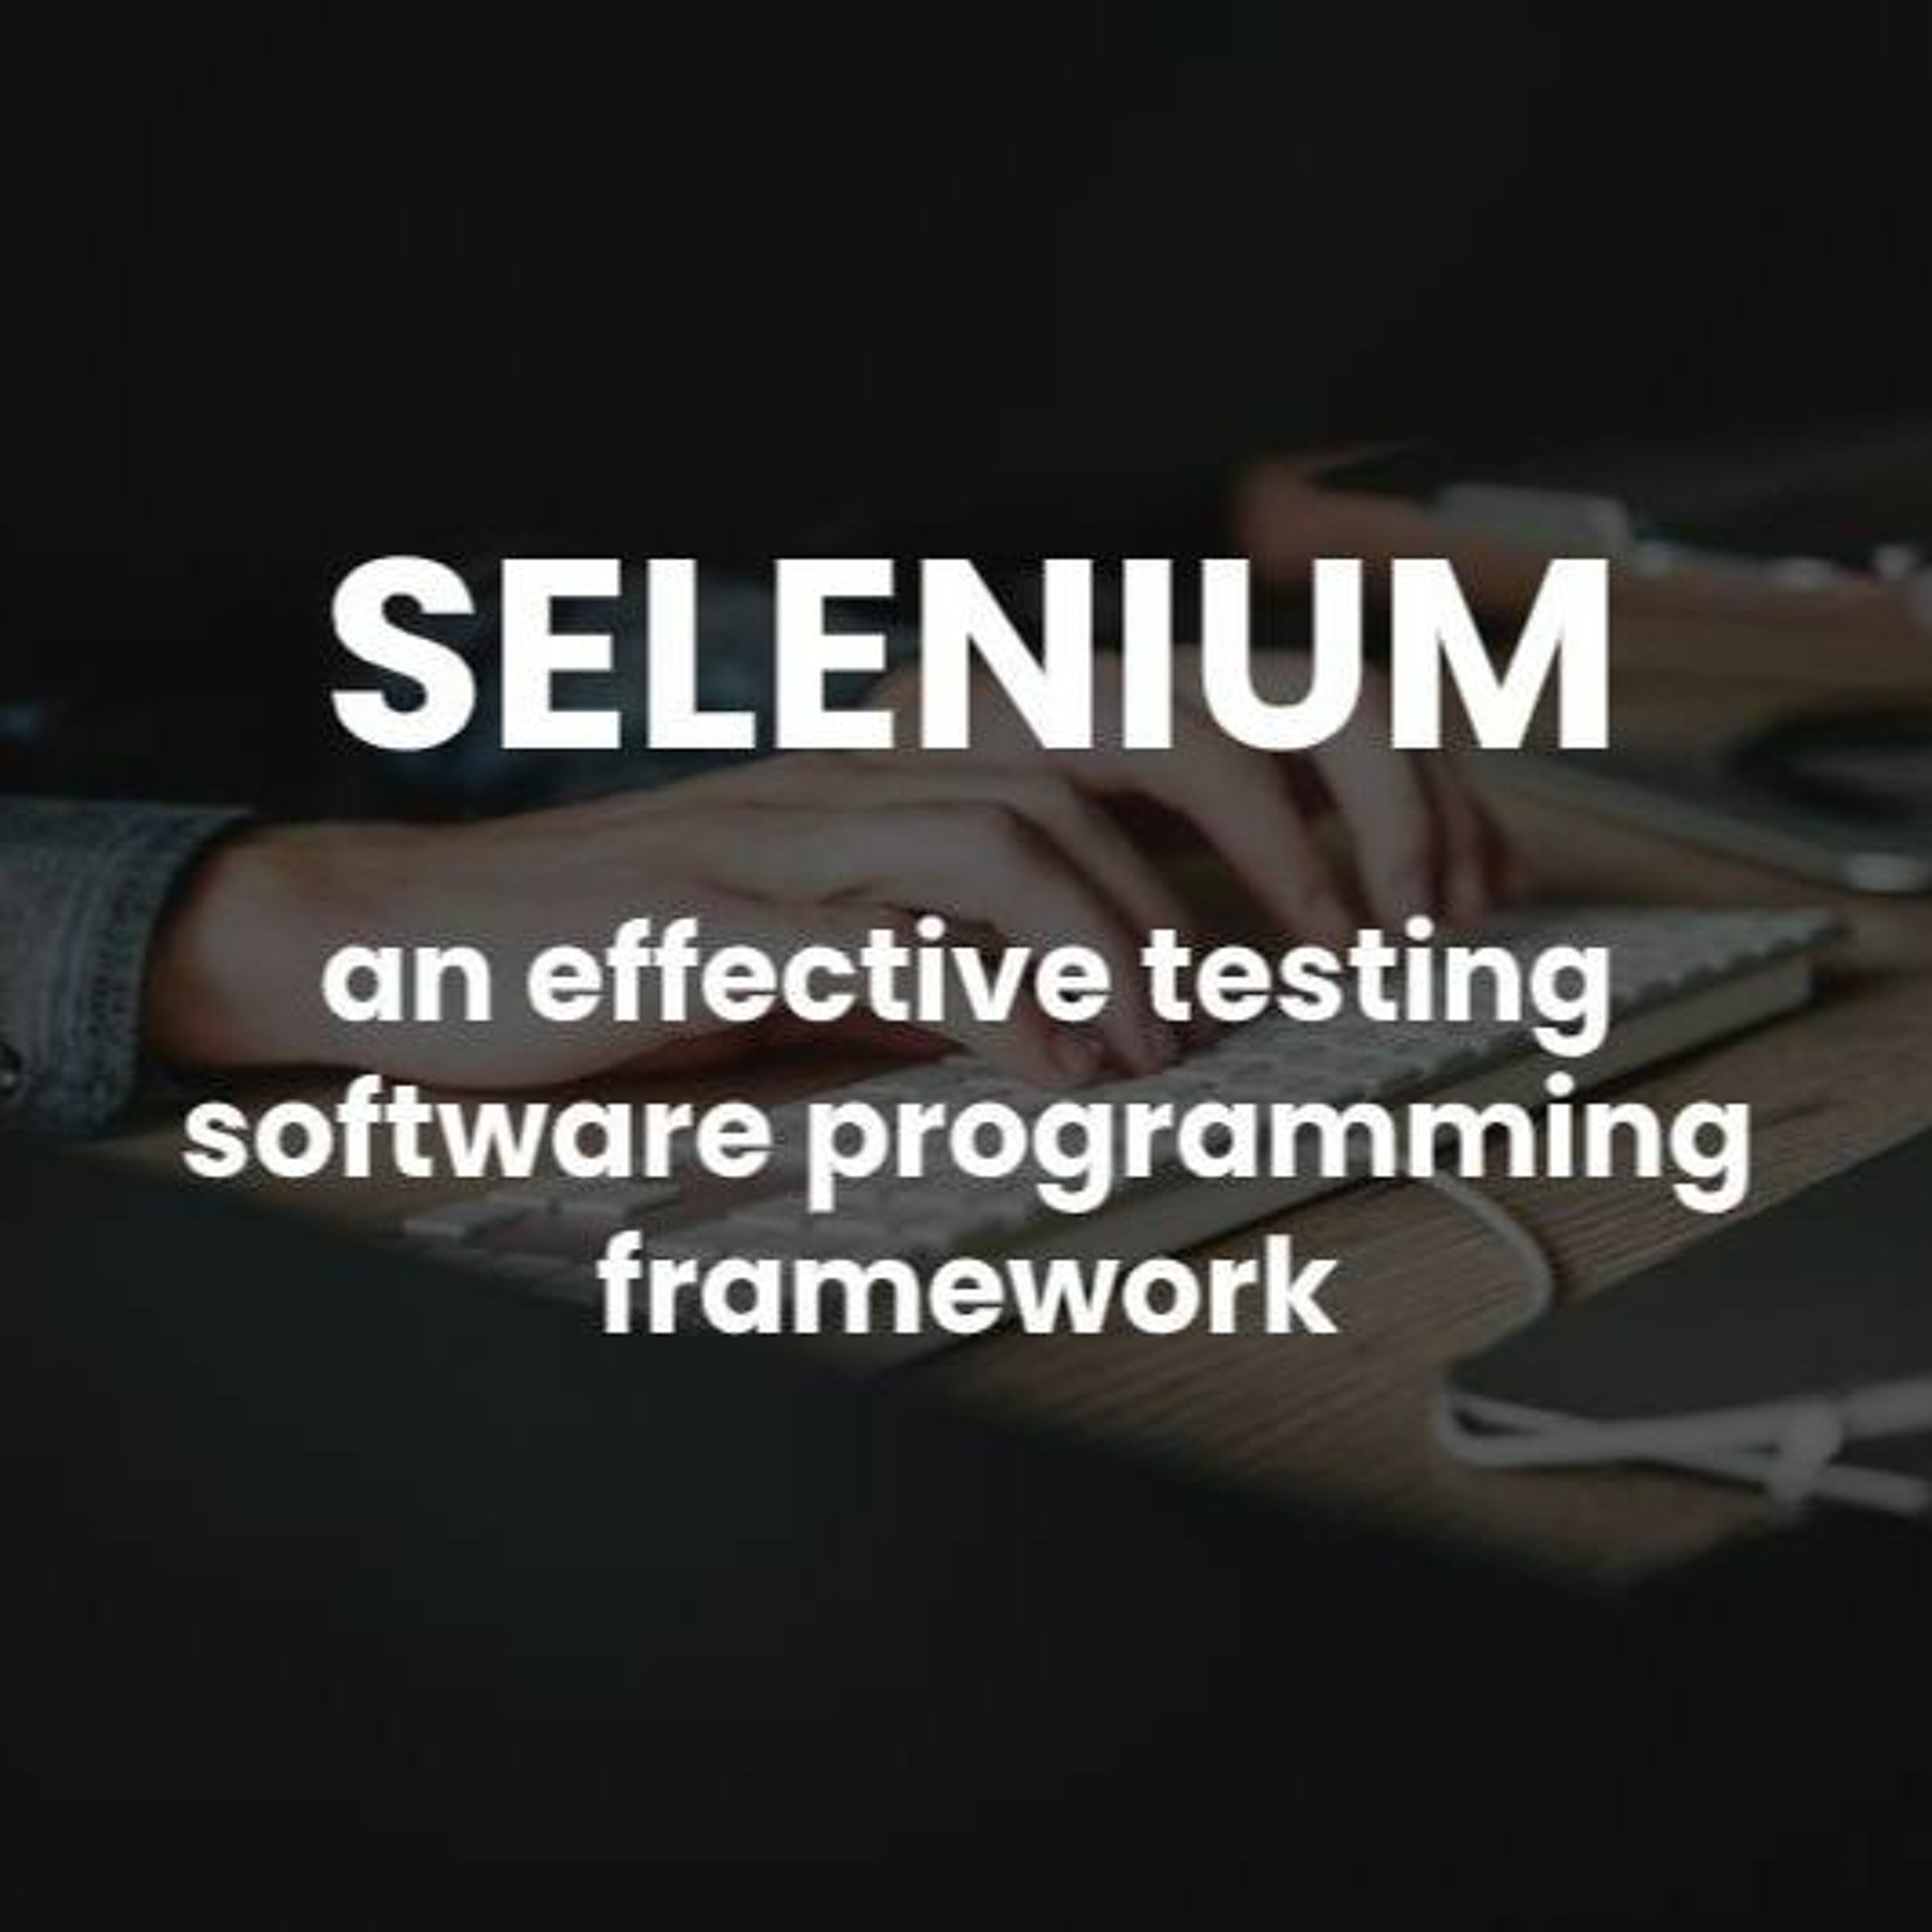 3. Why Selenium is one of the most widely-used and efficient testing software frameworks